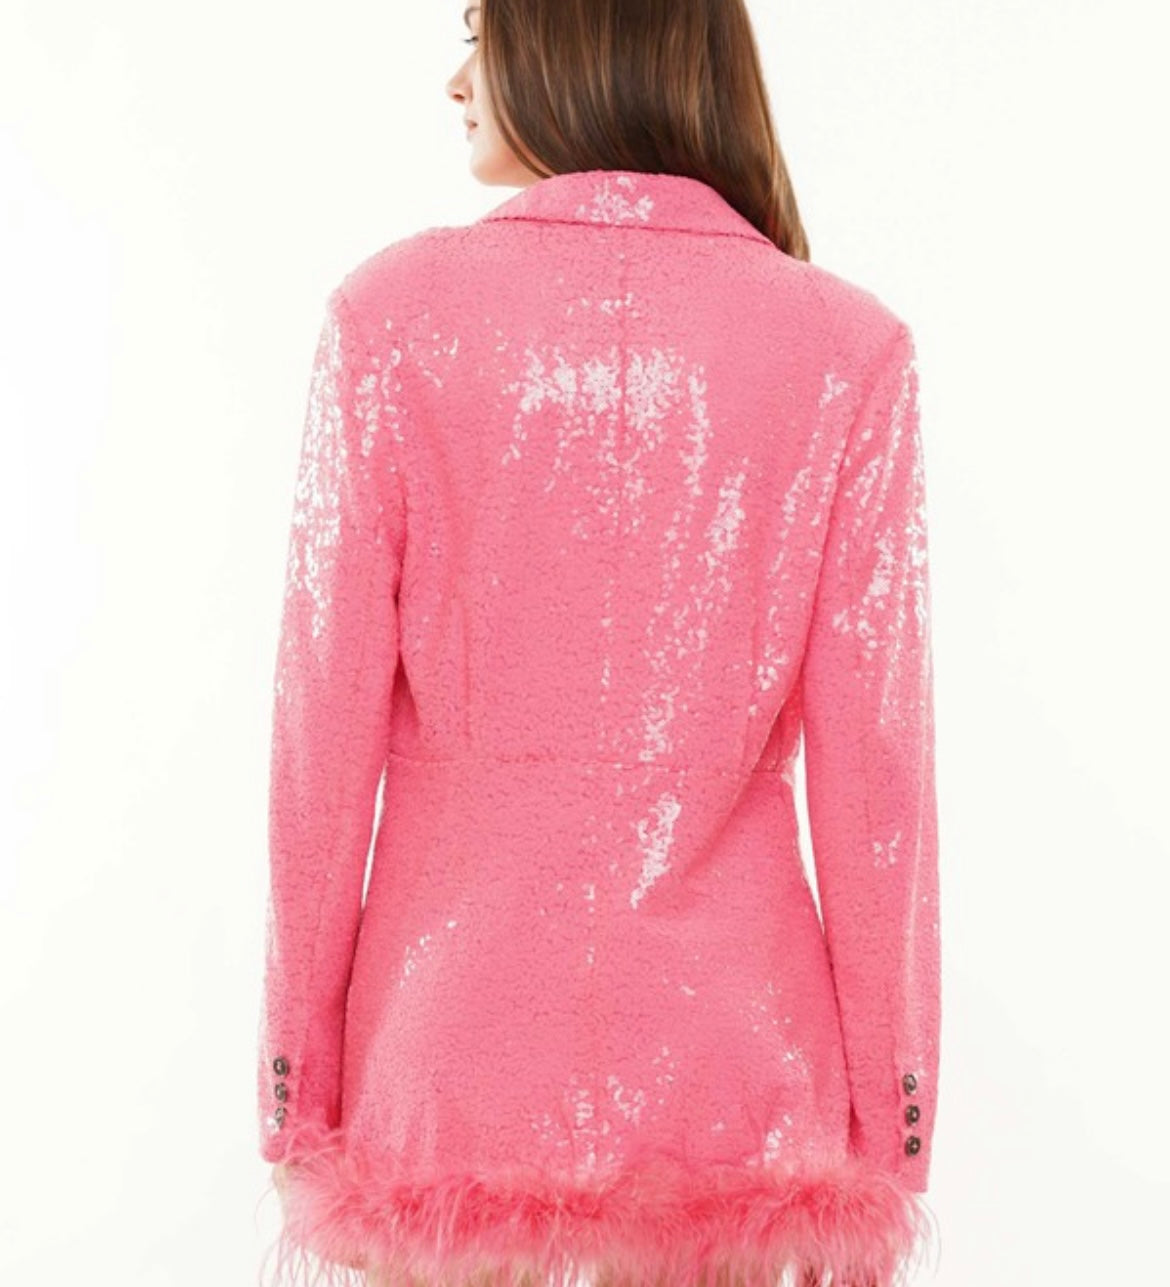 PINK SPARKLY SEQUIN BLAZER/DRESS EMBELLISHED WITH FAUX